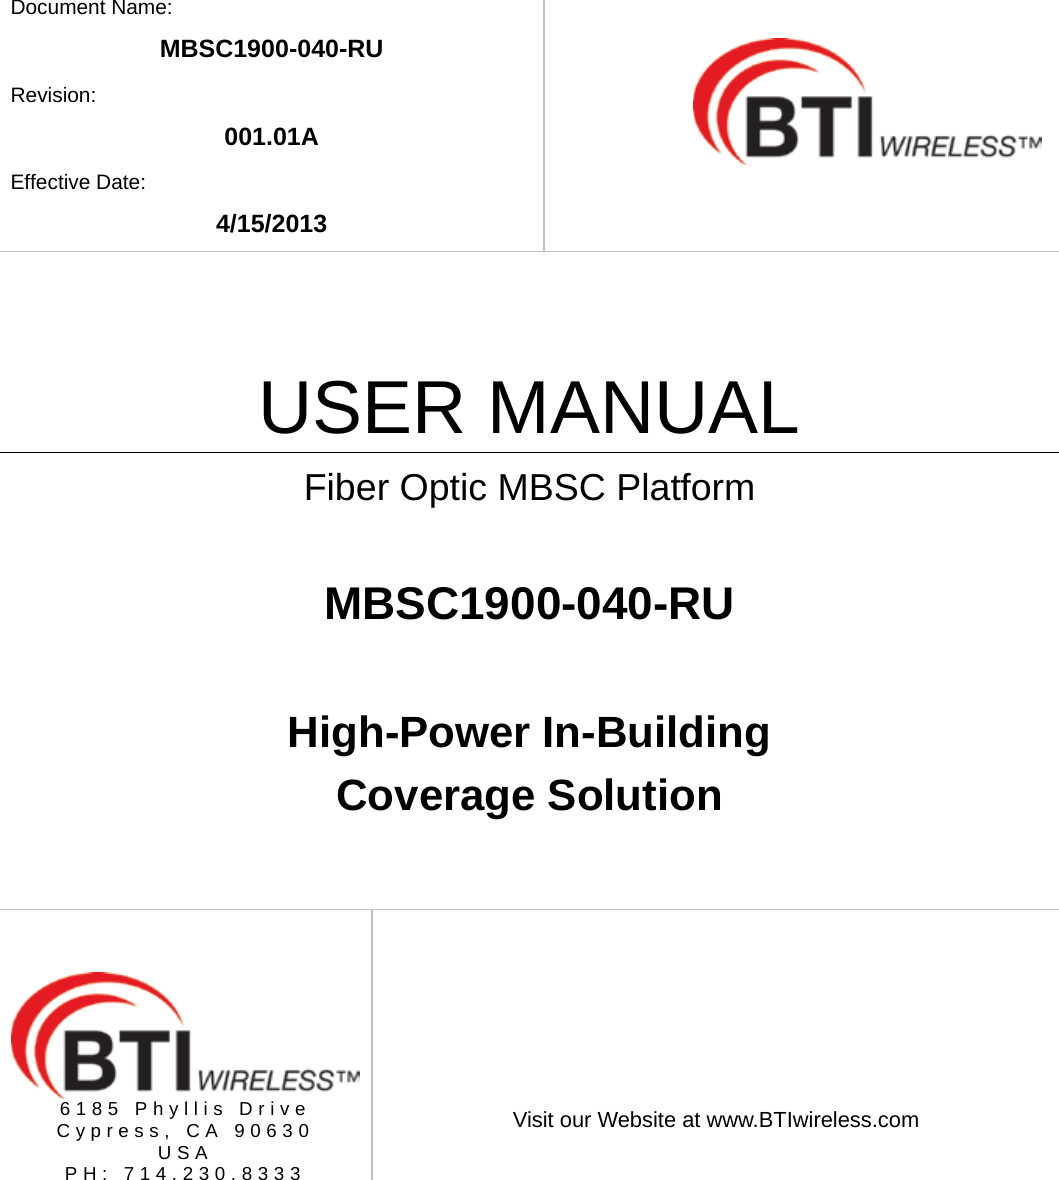   Document Name: MBSC1900-040-RU Revision: 001.01A Effective Date: 4/15/2013    USER MANUAL Fiber Optic MBSC Platform  MBSC1900-040-RU  High-Power In-Building Coverage Solution       6185 Phyllis Drive Cypress, CA 90630 USA PH: 714.230.8333   Visit our Website at www.BTIwireless.com  